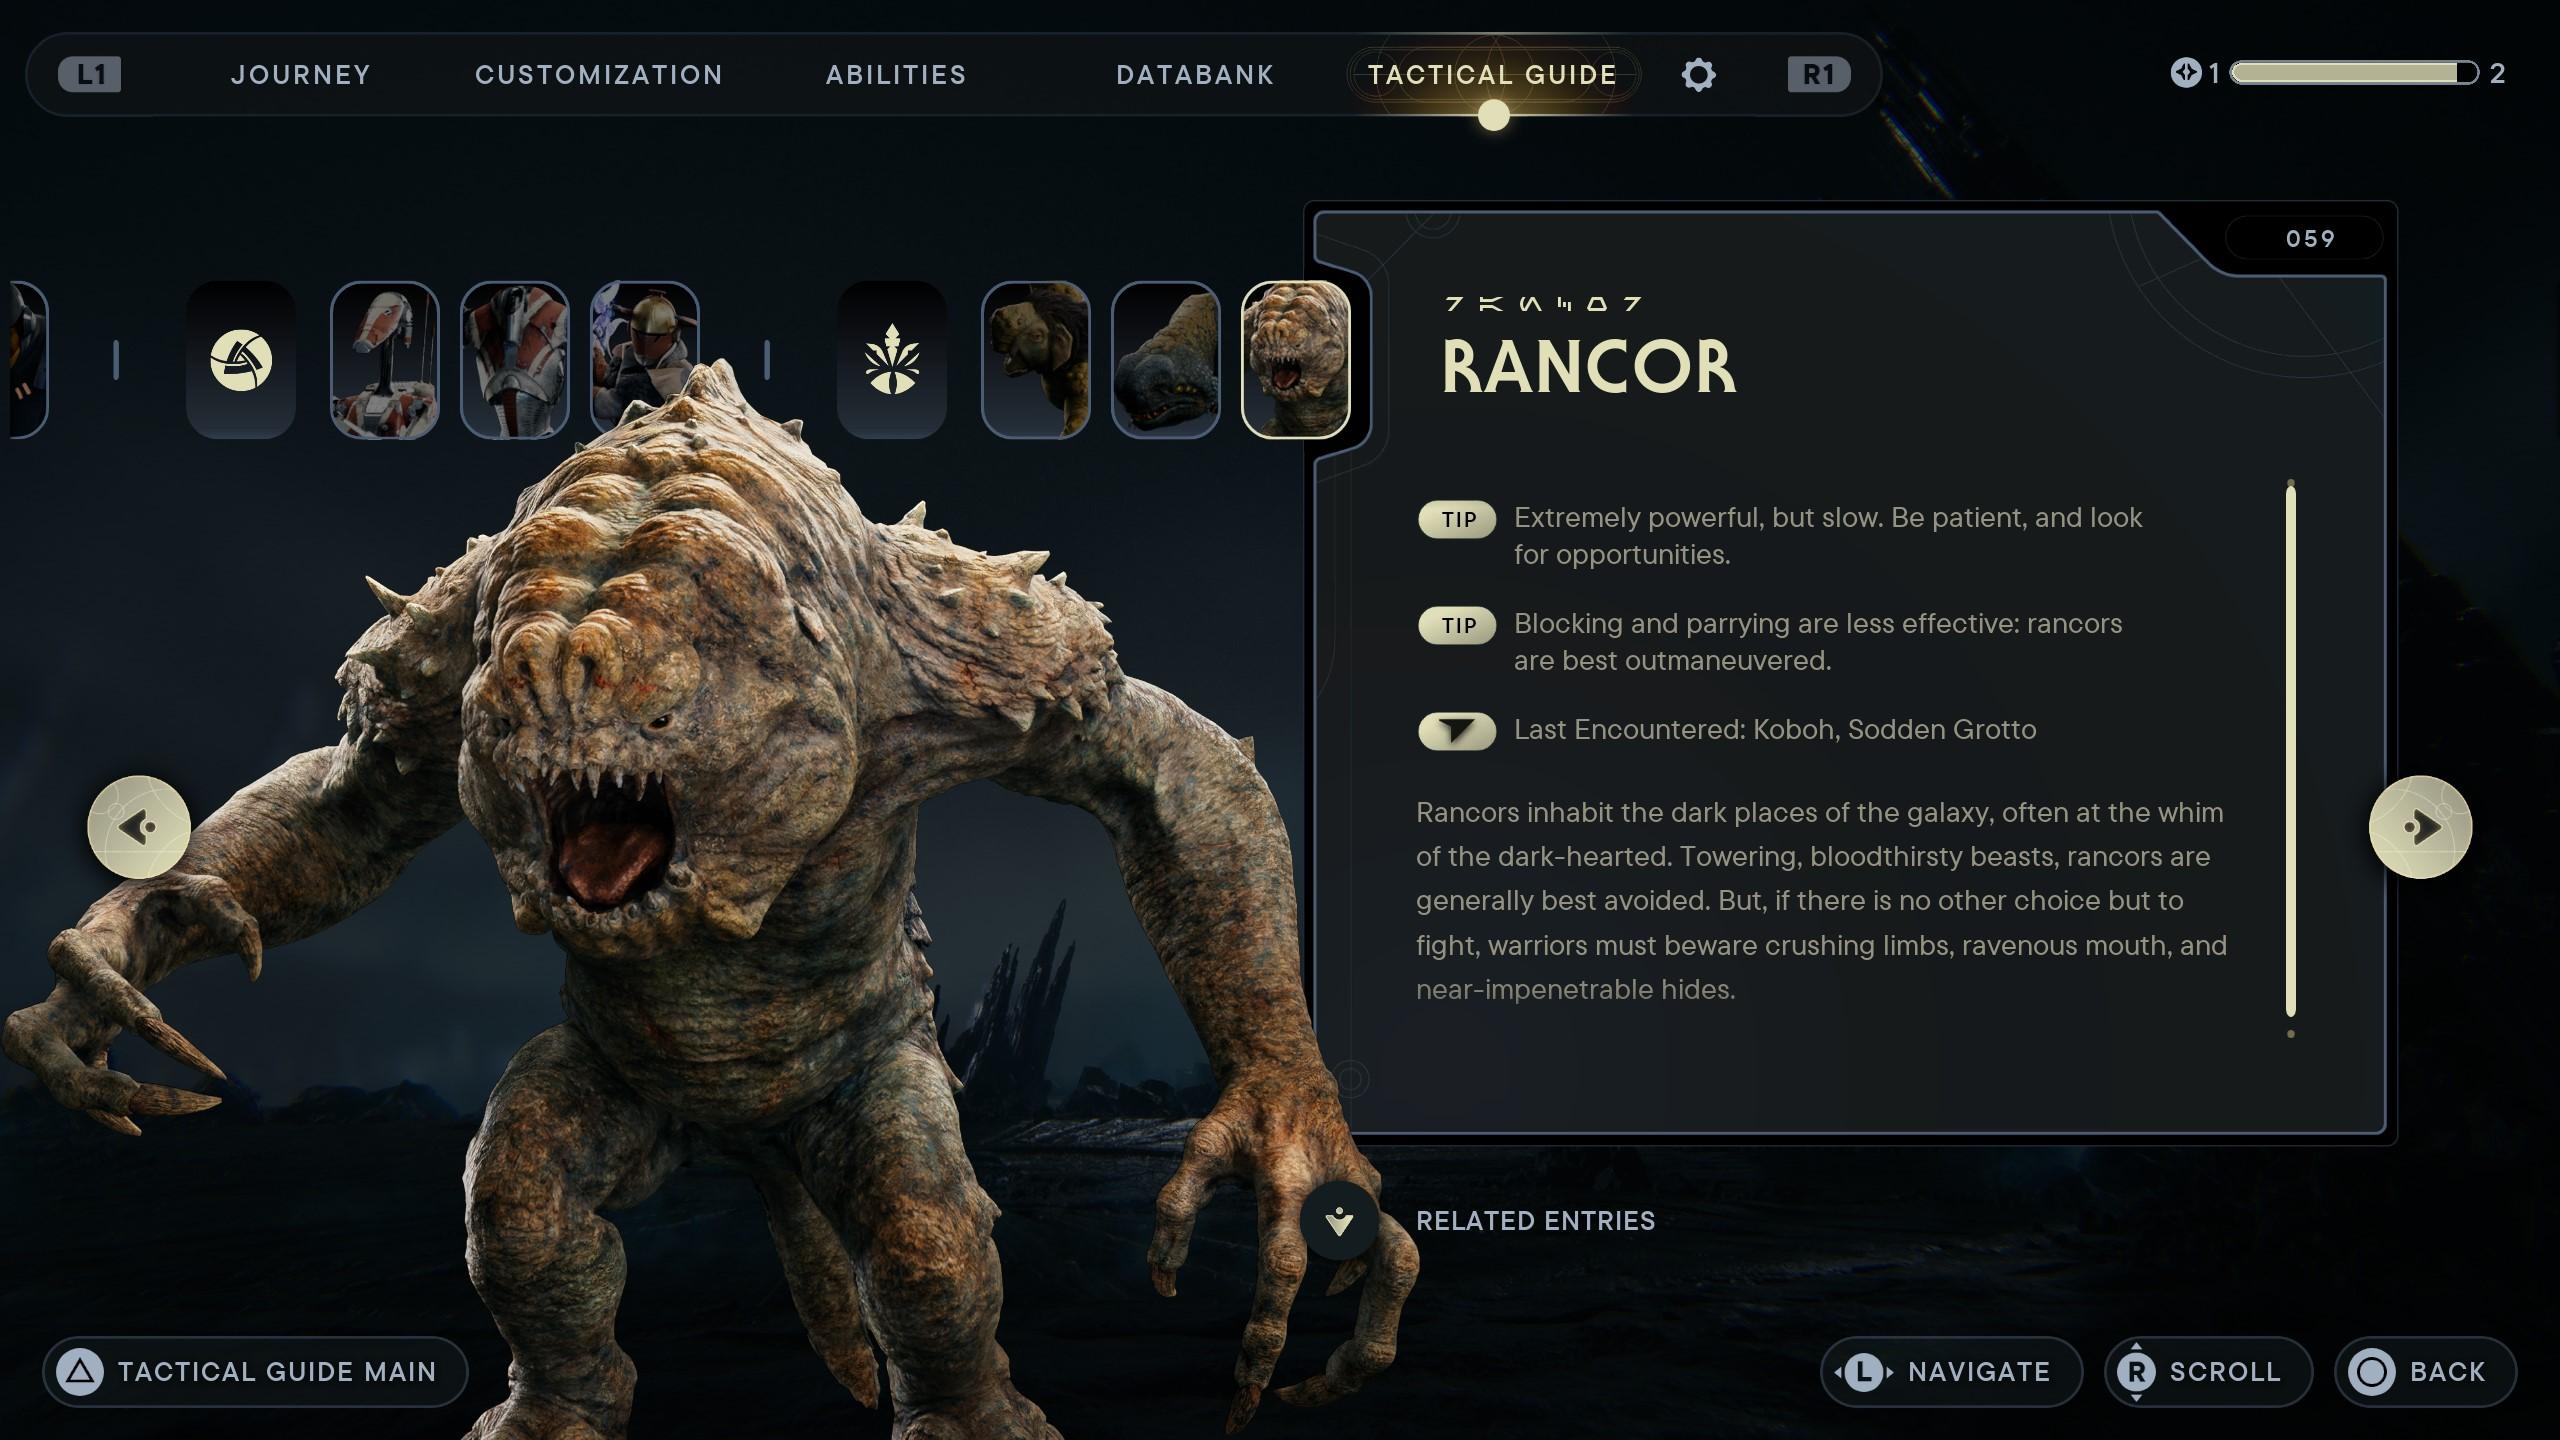 Star Wars Jedi: Survivor Information on the Rancor within the Tactical Guide.